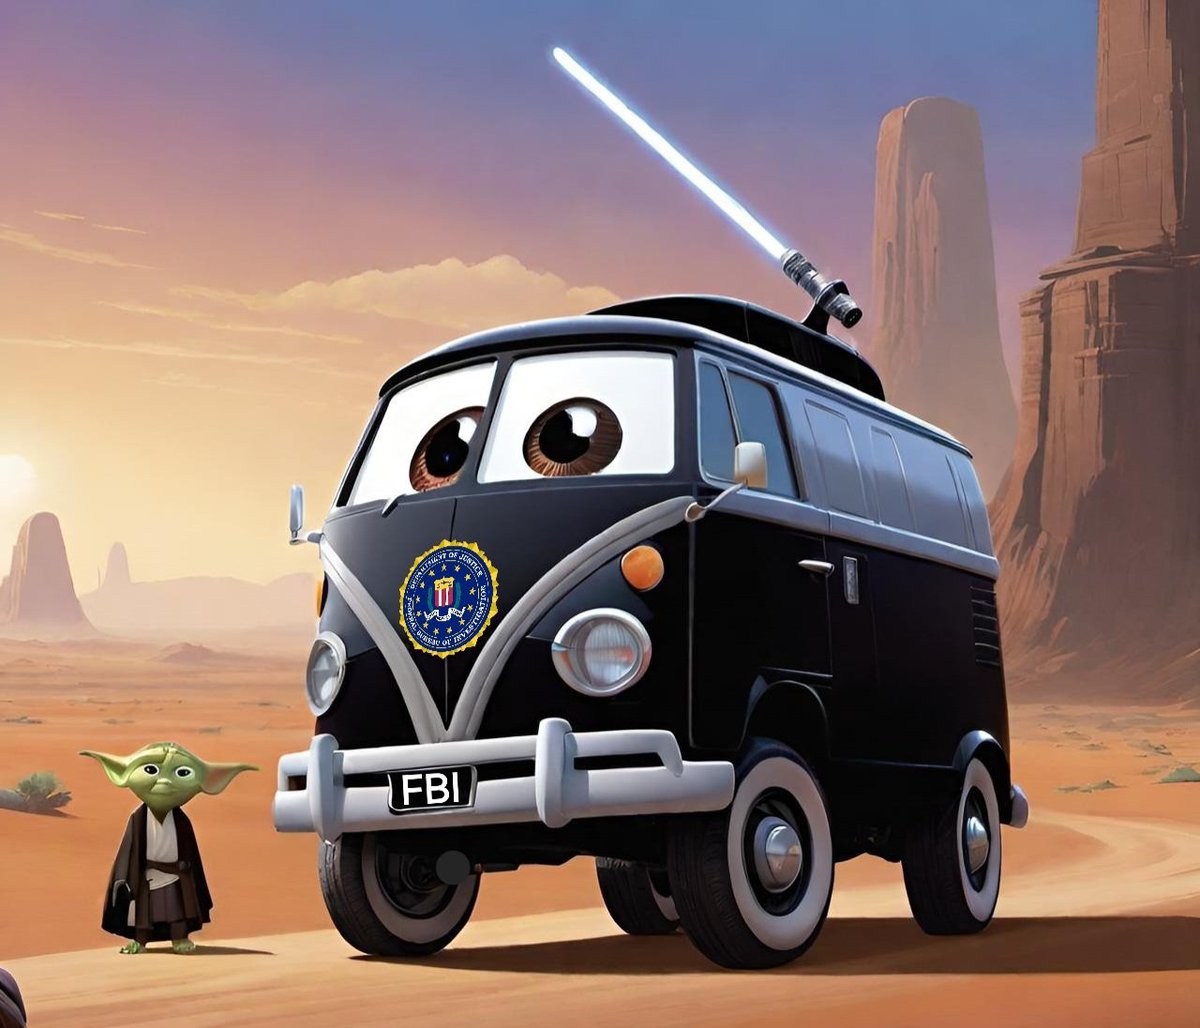 Happy #Maythe4thBeWithYou from this damn van!